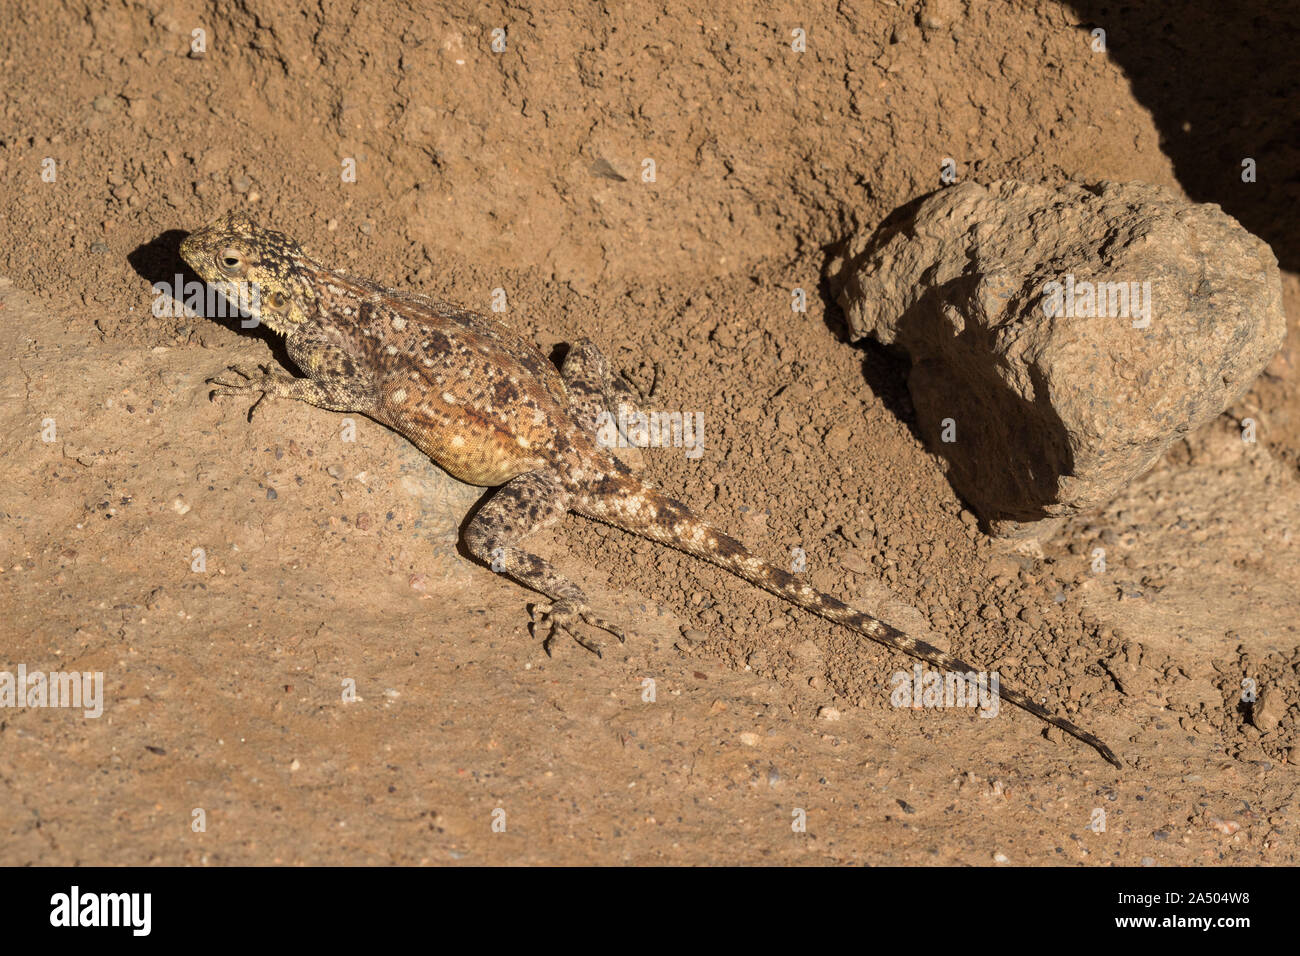 Southern rock agama (Agama atra), Namaqualand national park, Northern Cape, South Africa Stock Photo